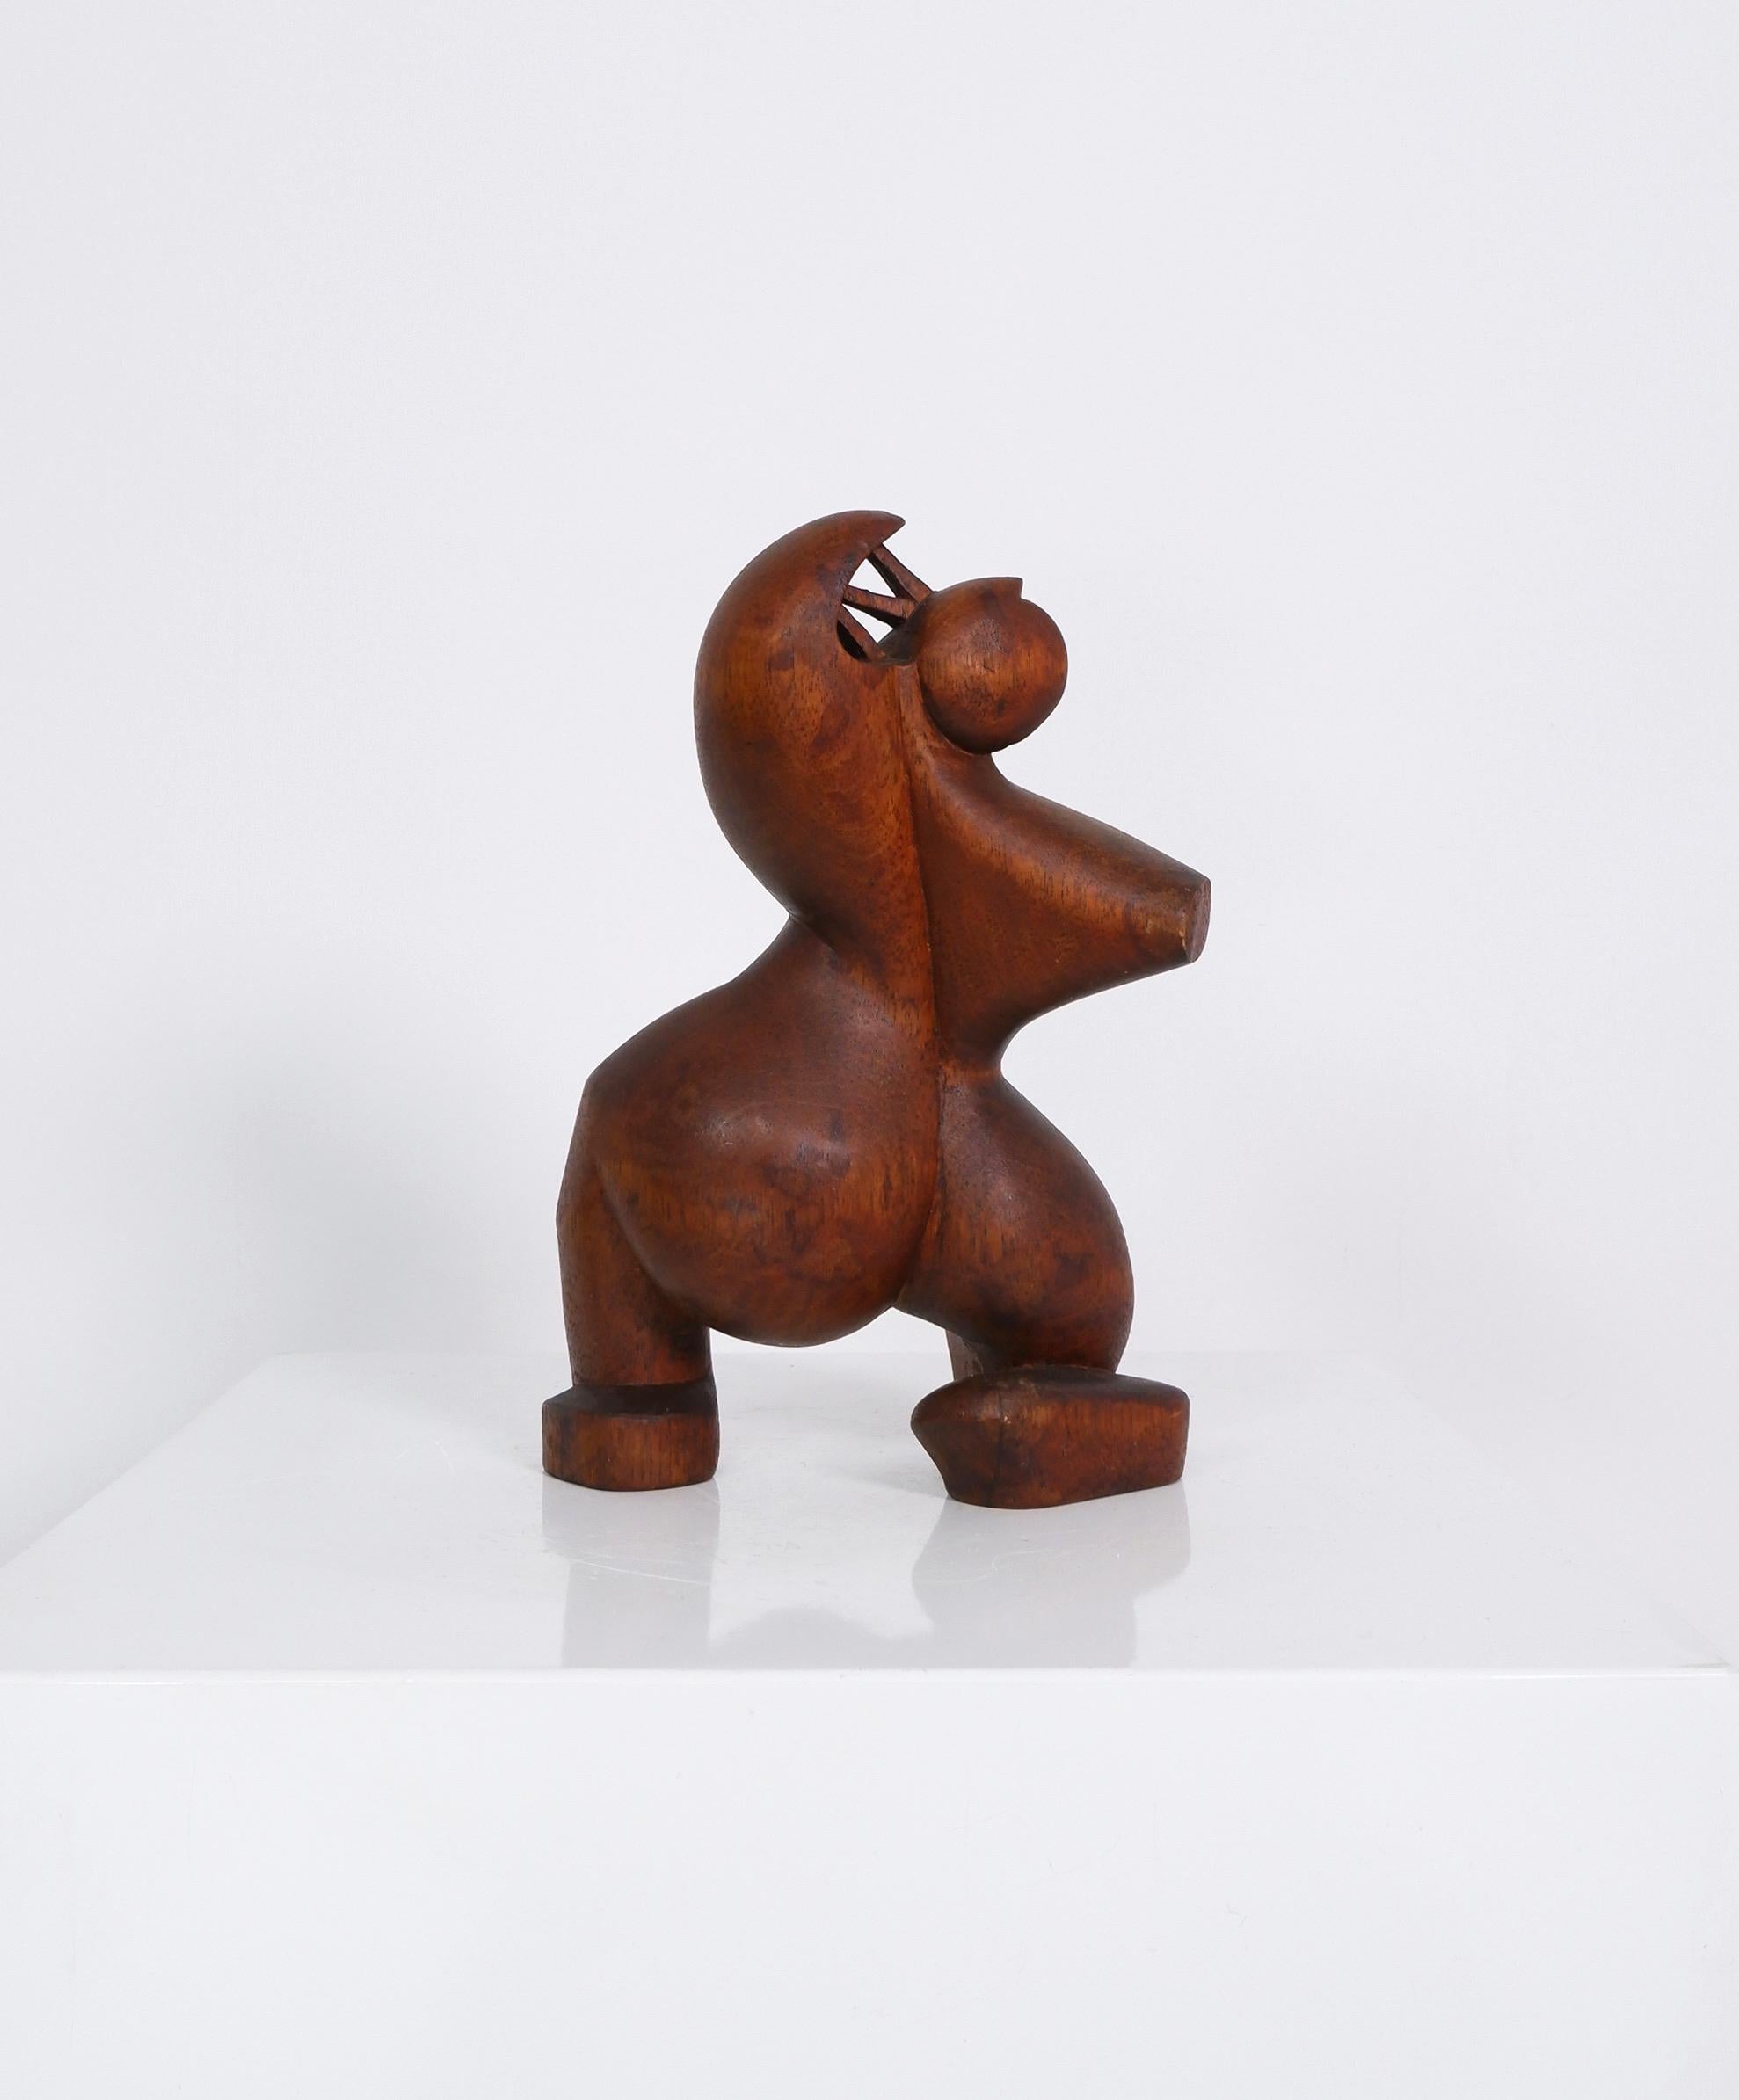 Wooden Surrealist Sculpture, c.1970. 

Dimensions (cm, approx): 
Height: 27.5
Width: 19
Depth: 12

Condition: Minor loss to one edge as pictured. 